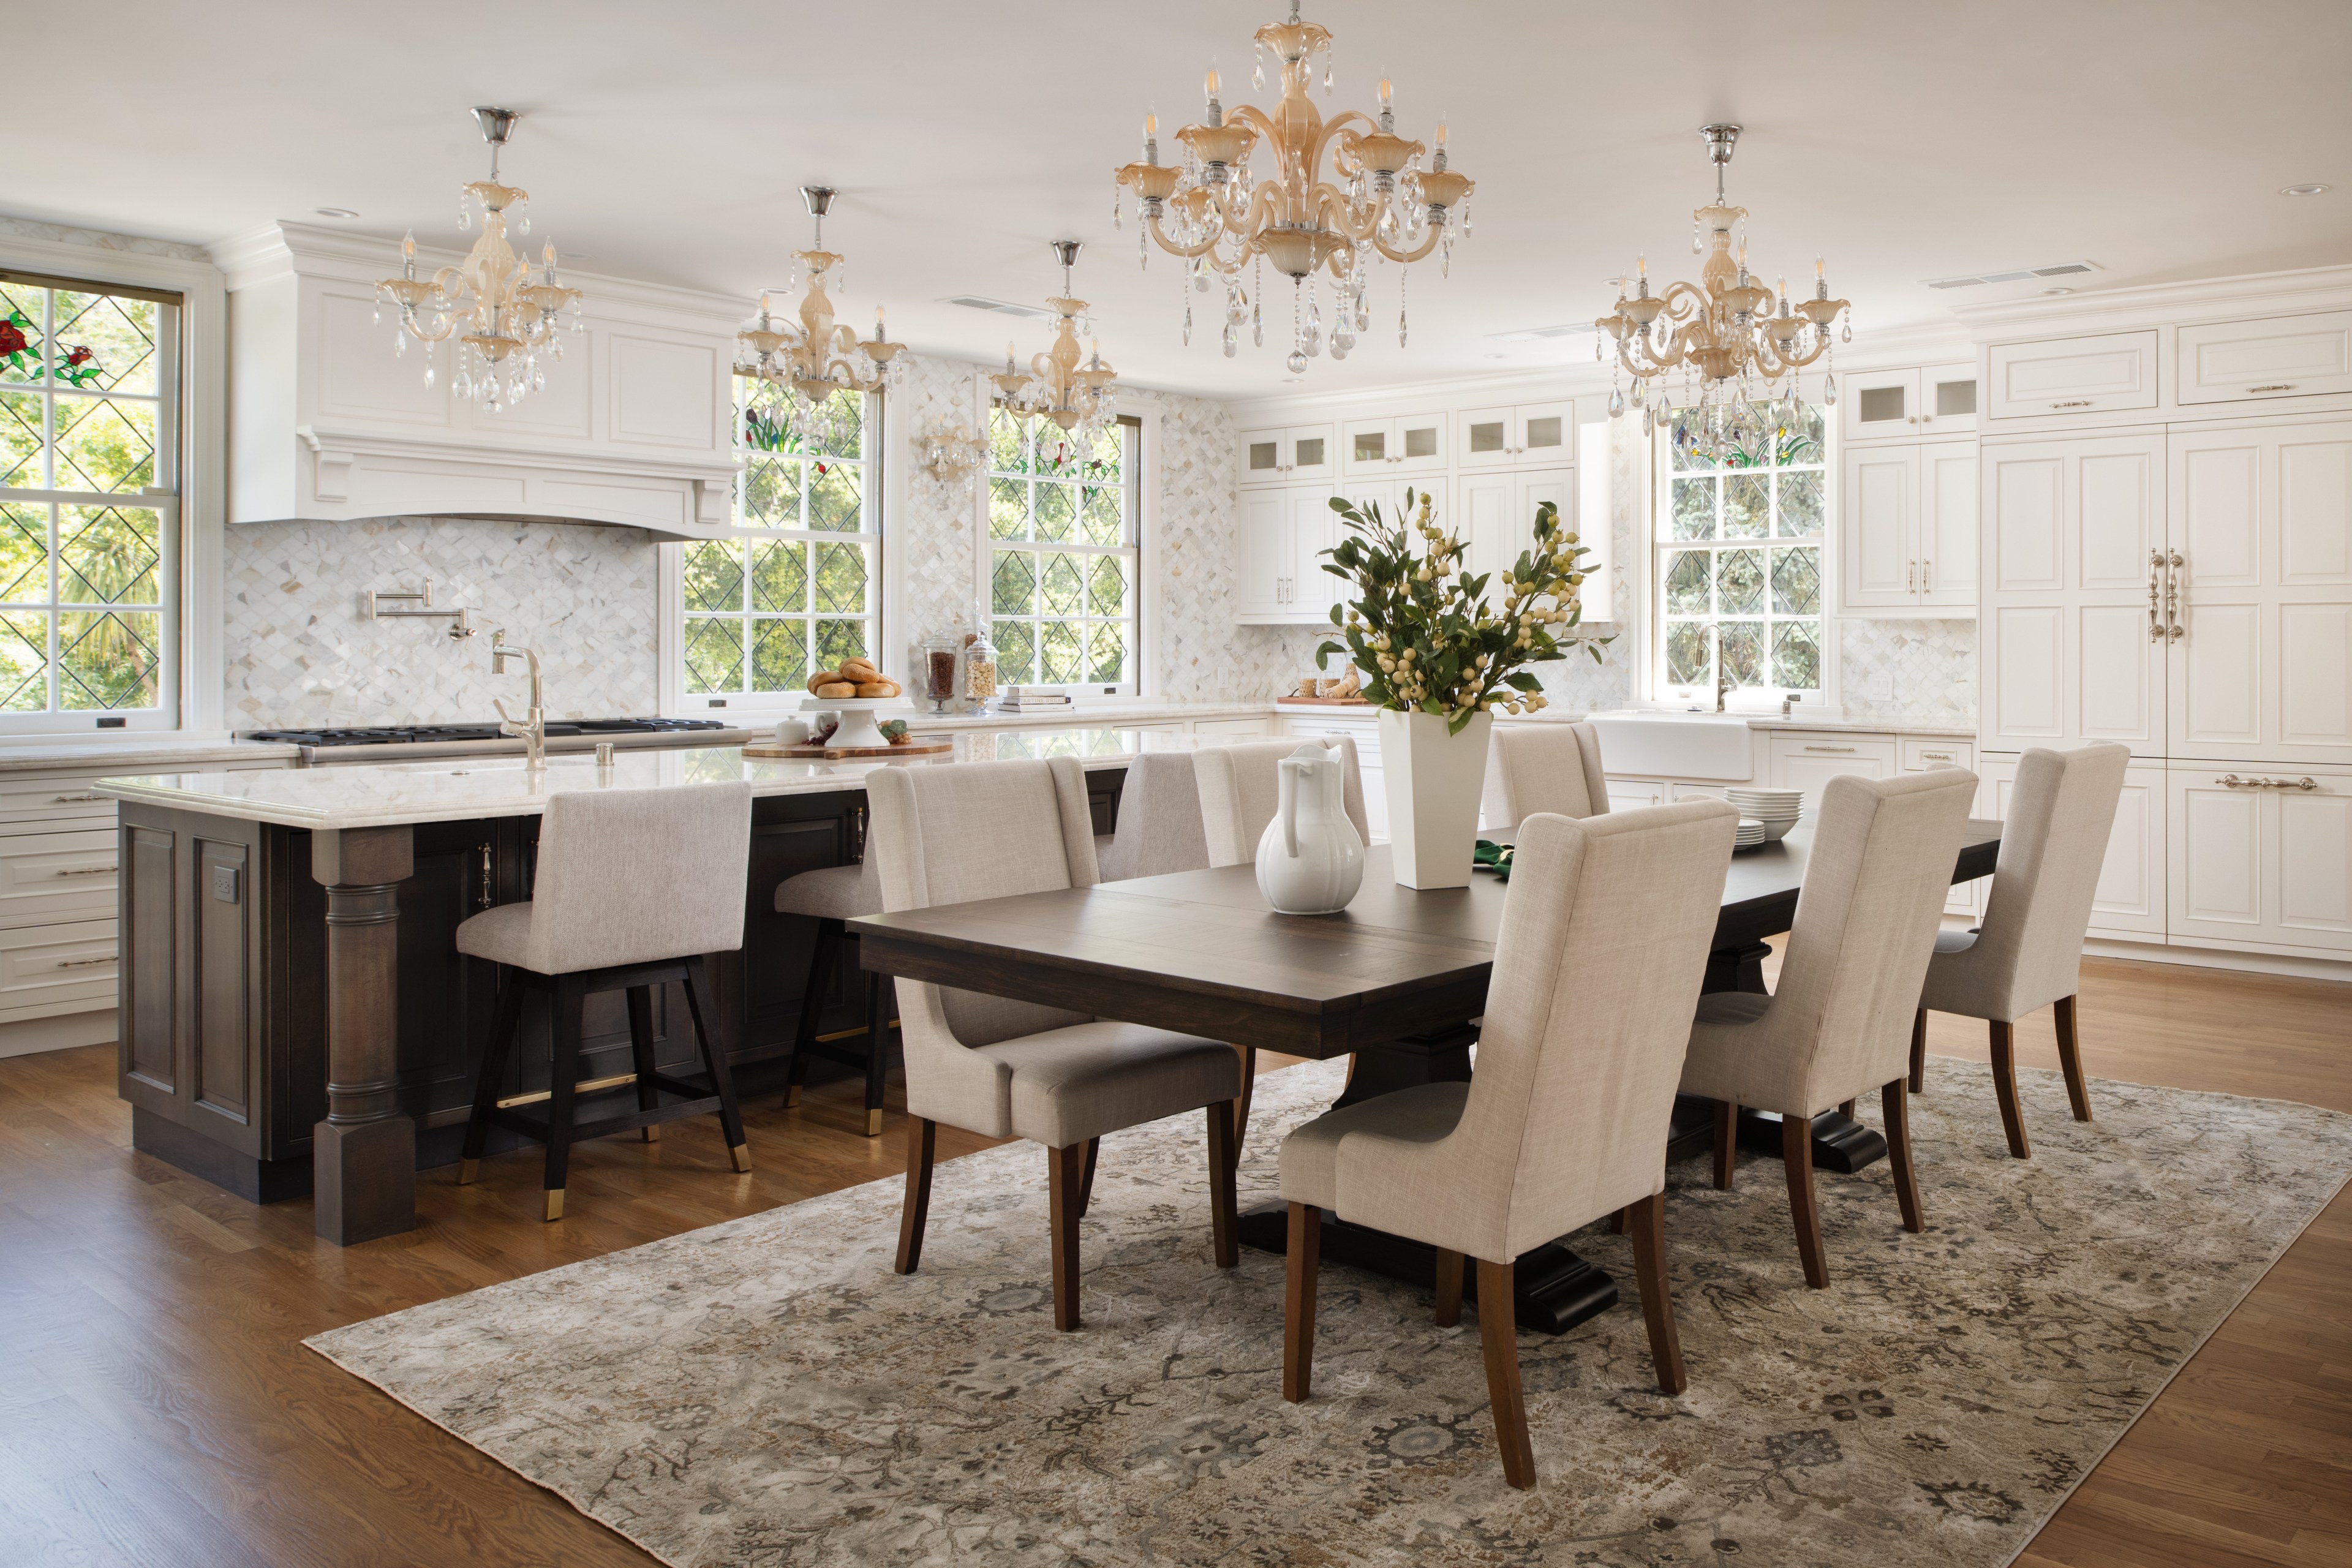 Fancy chandeliers, deep cabinets and a marble-topped island adorn a kitchen within the 'Western White House'